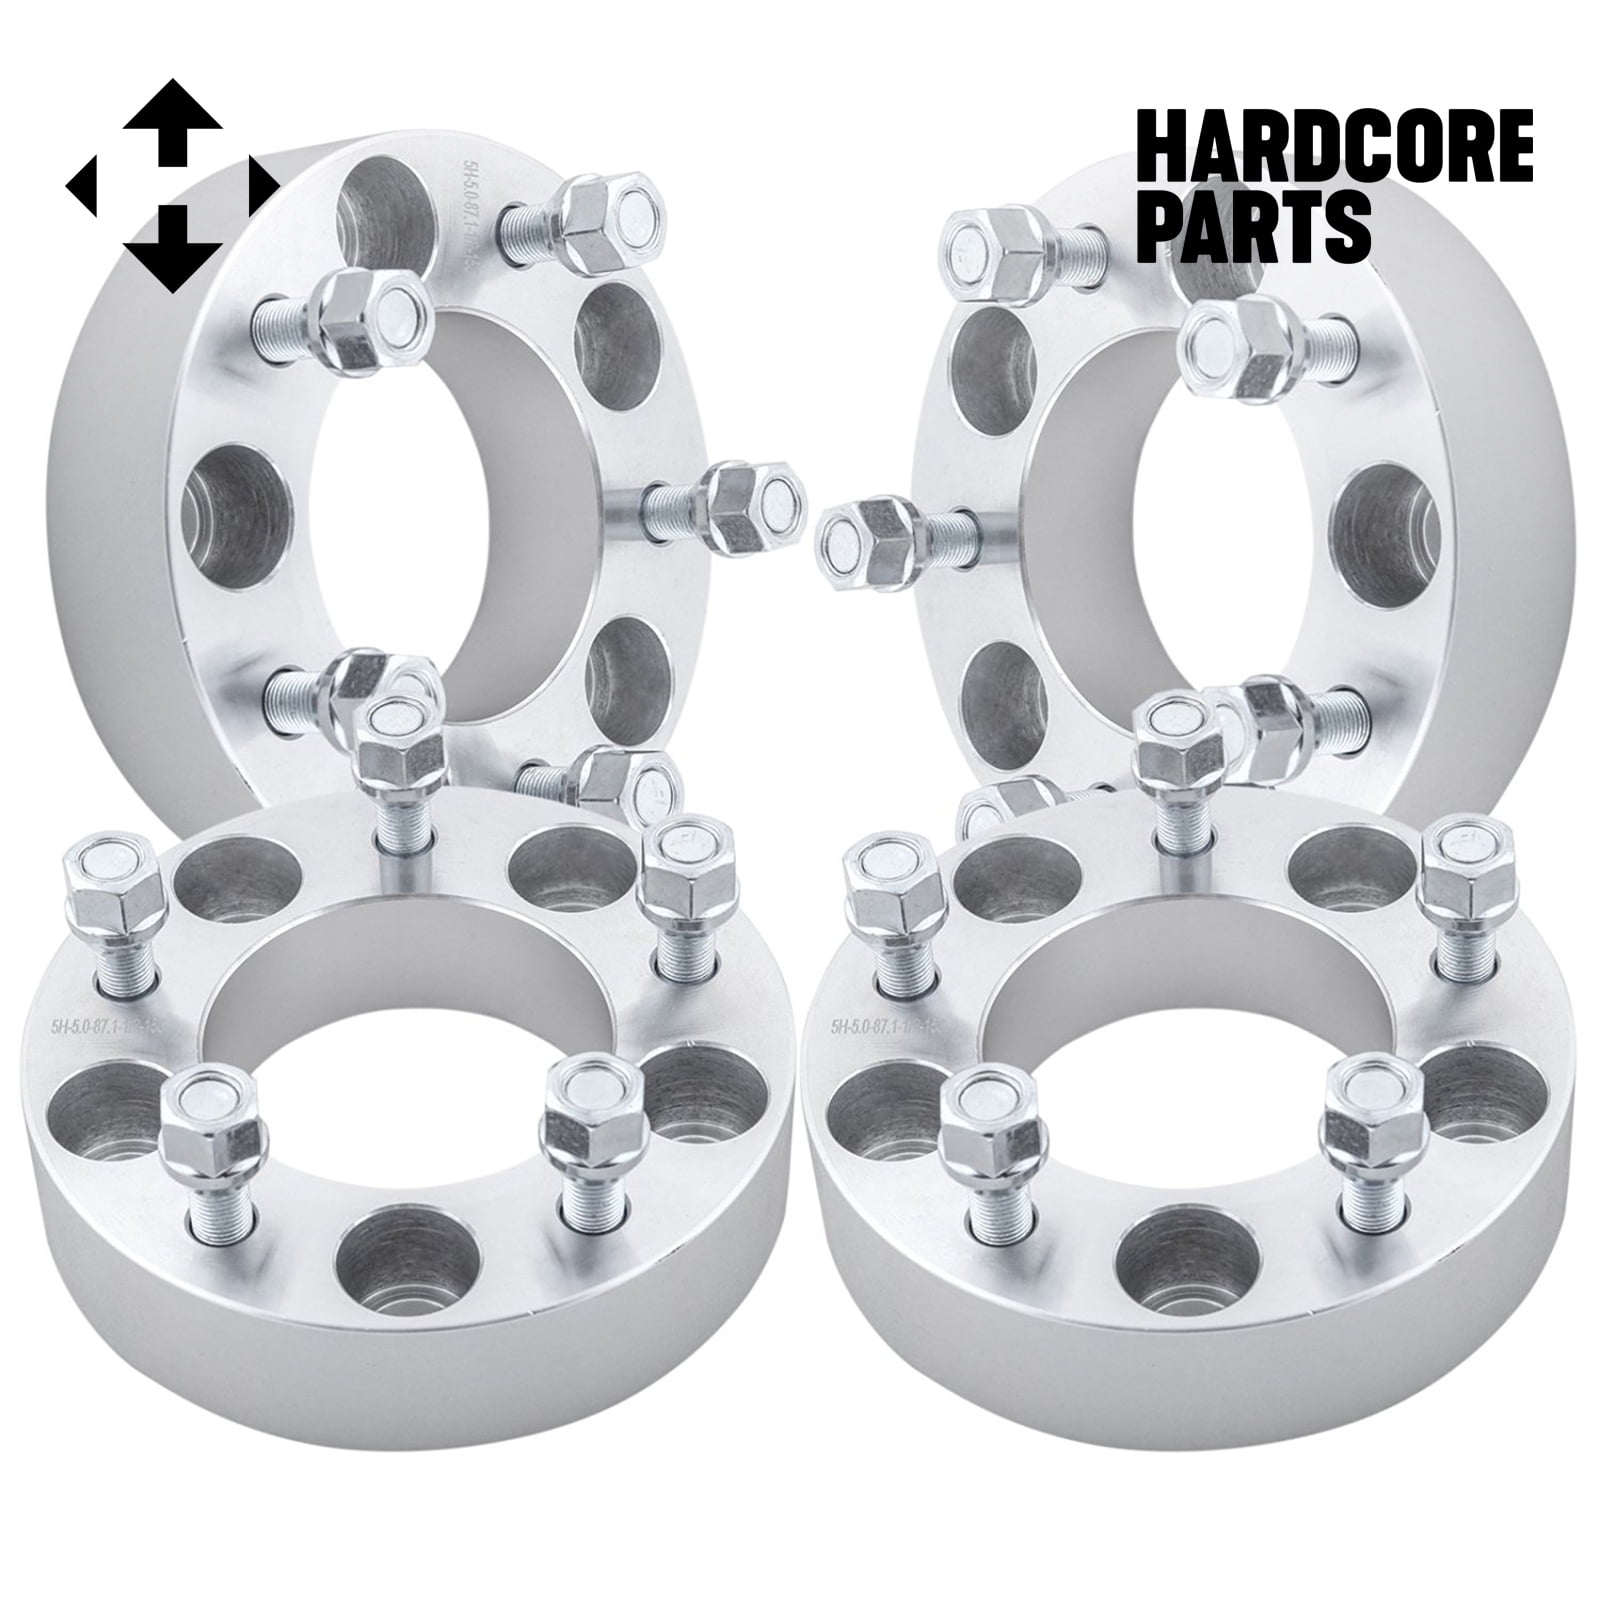 2 (1 per side) Wheel Spacers Adapters M12 x 1.5 threads 4 QTY